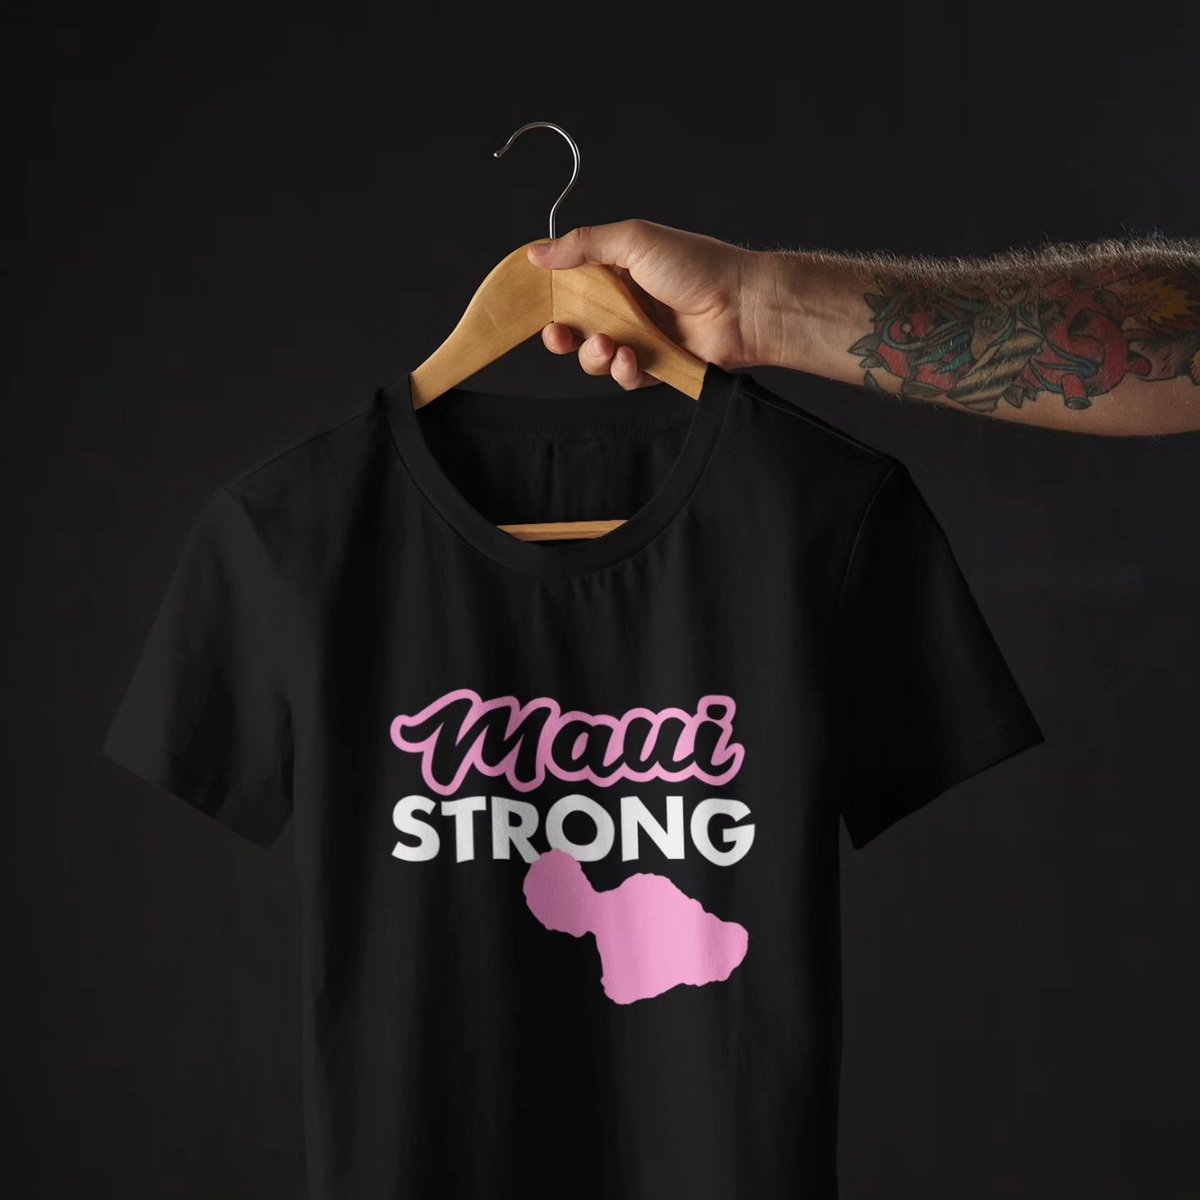 Maui Strong Tee: hikebeaststore.com/products/maui-… Always stay strong, no matter what comes our way. 💪 #hikebeast #mauistrong #mauinokaoi #mauilife